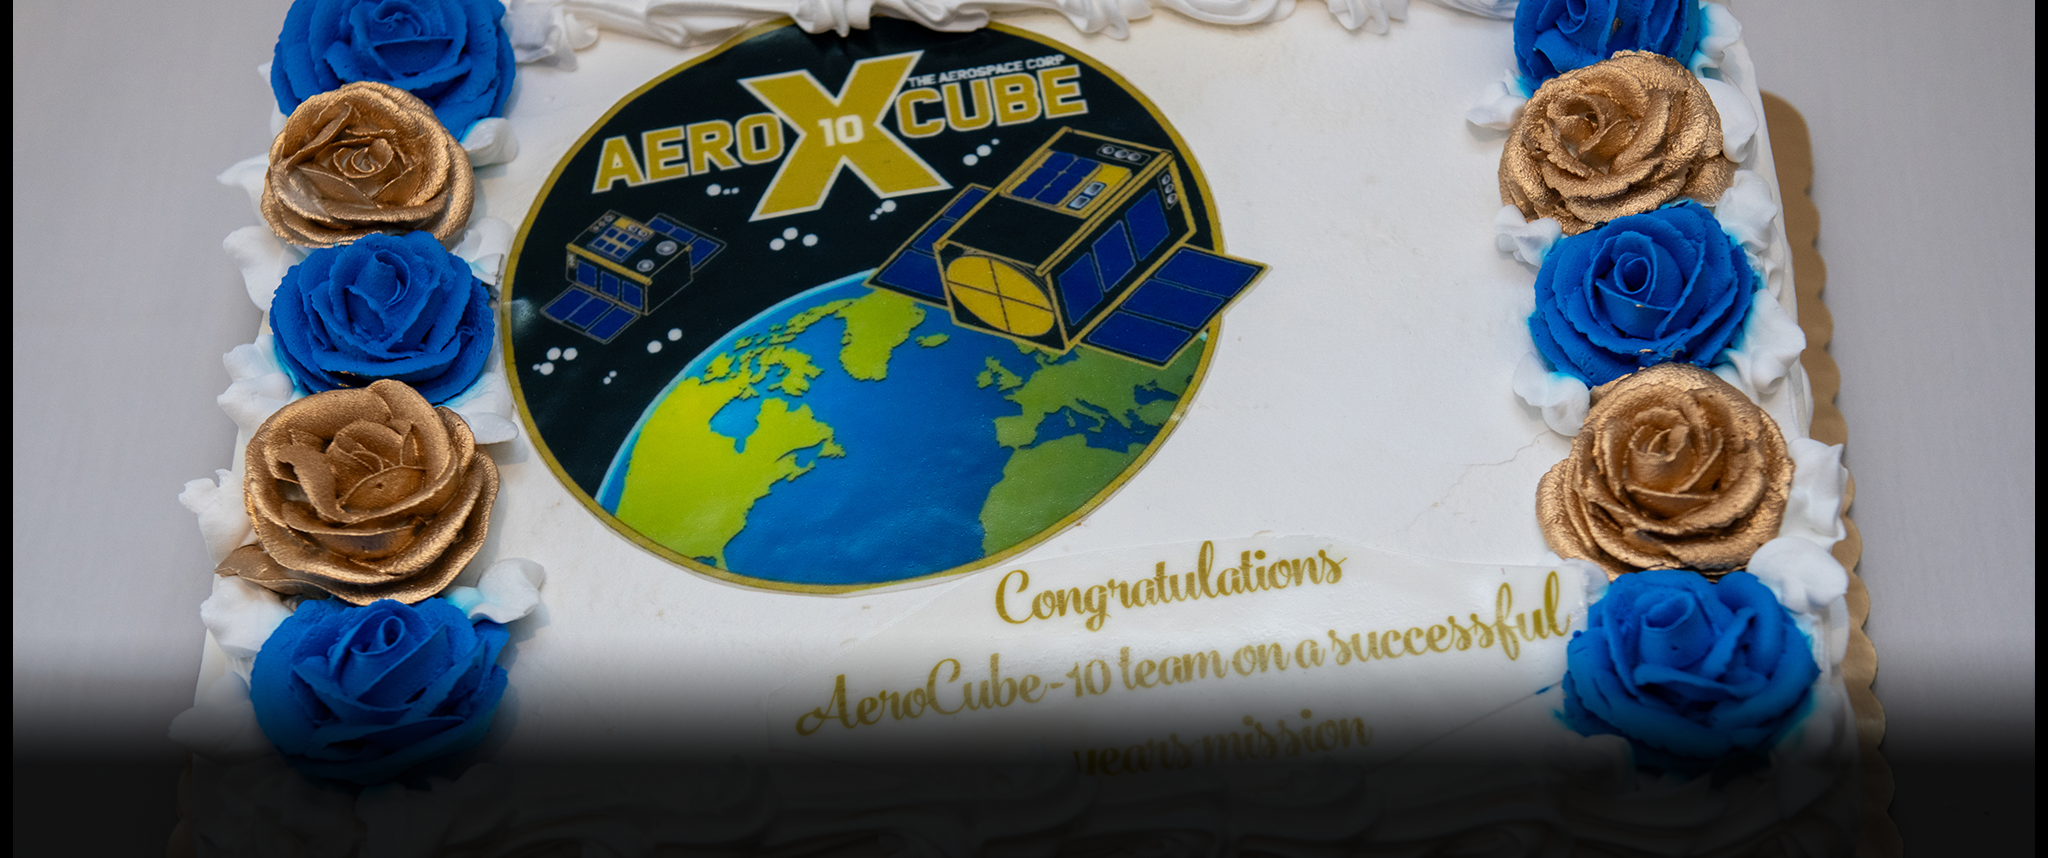 Aerospace celebrated the successful four-year mission of AeroCube-10, packed with space experiments and technology demonstrations, including atmospheric probes, solar cell longevity tests, and a water thruster.